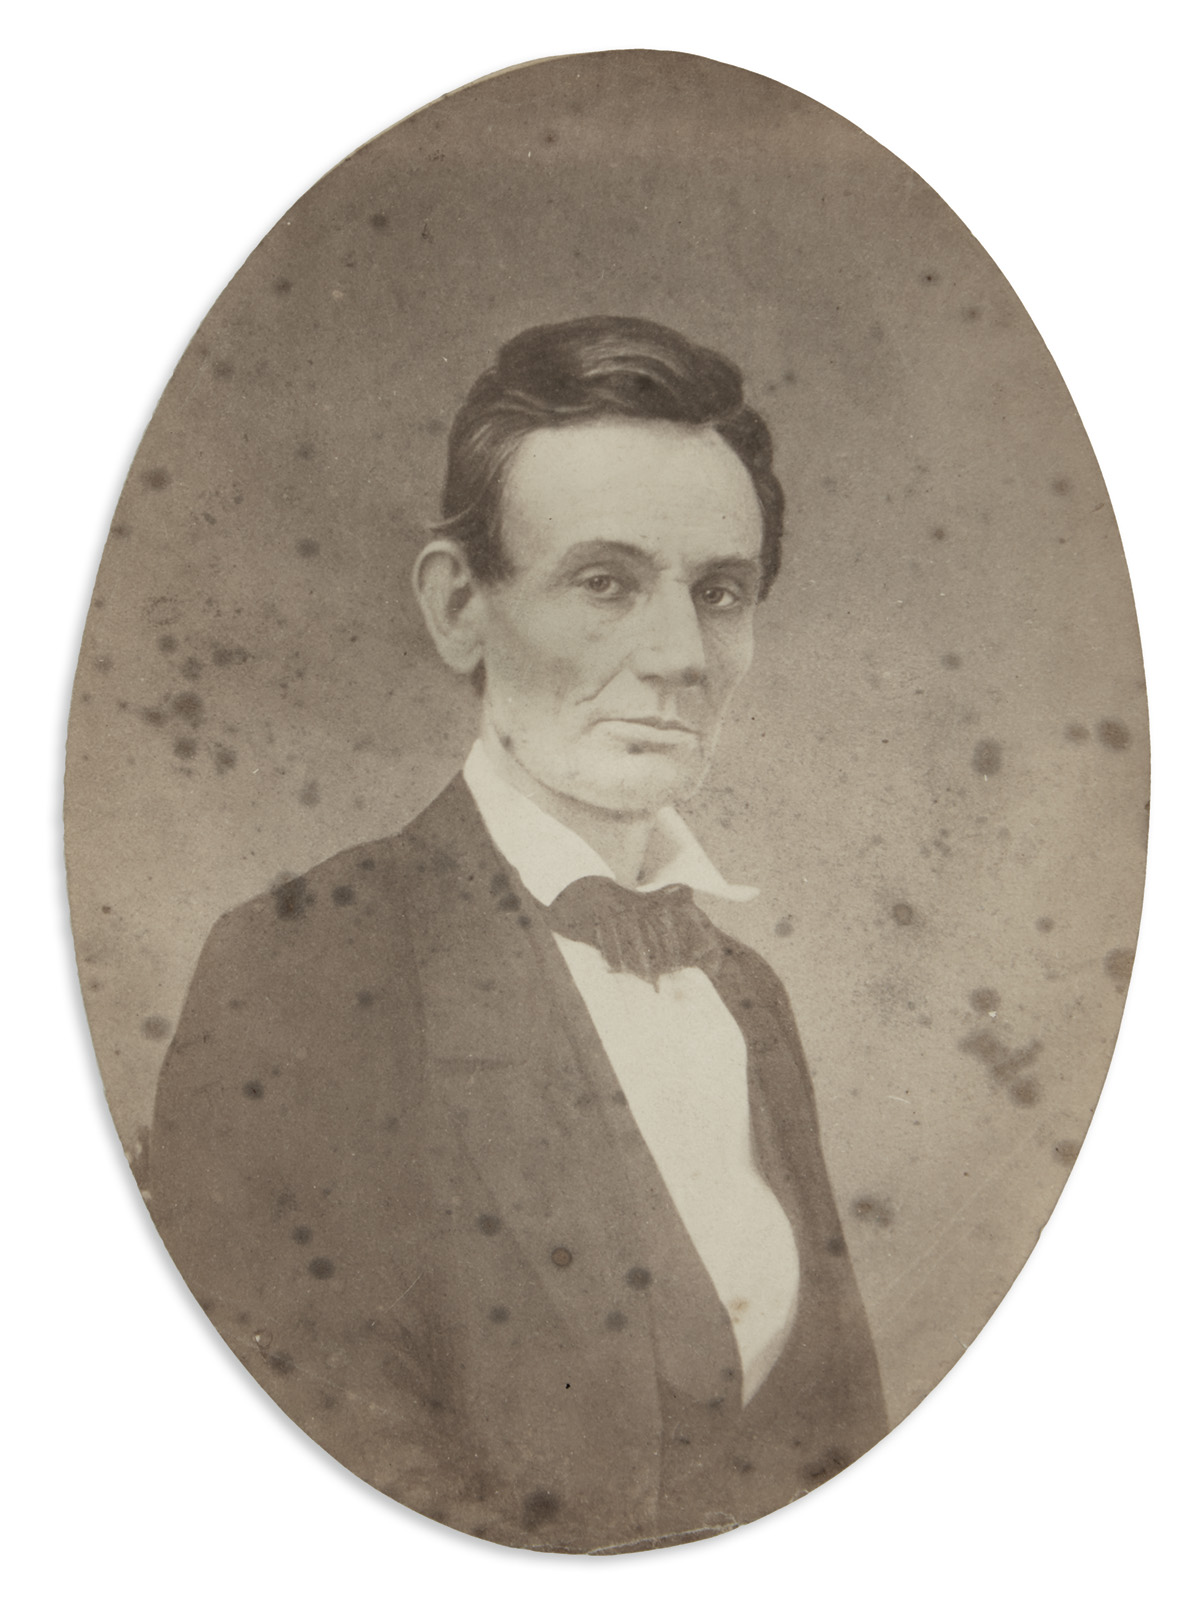 (LINCOLN, ABRAHAM.) Fassett, Samuel M. Early portrait of Lincoln from a few months before his presidential campaign.